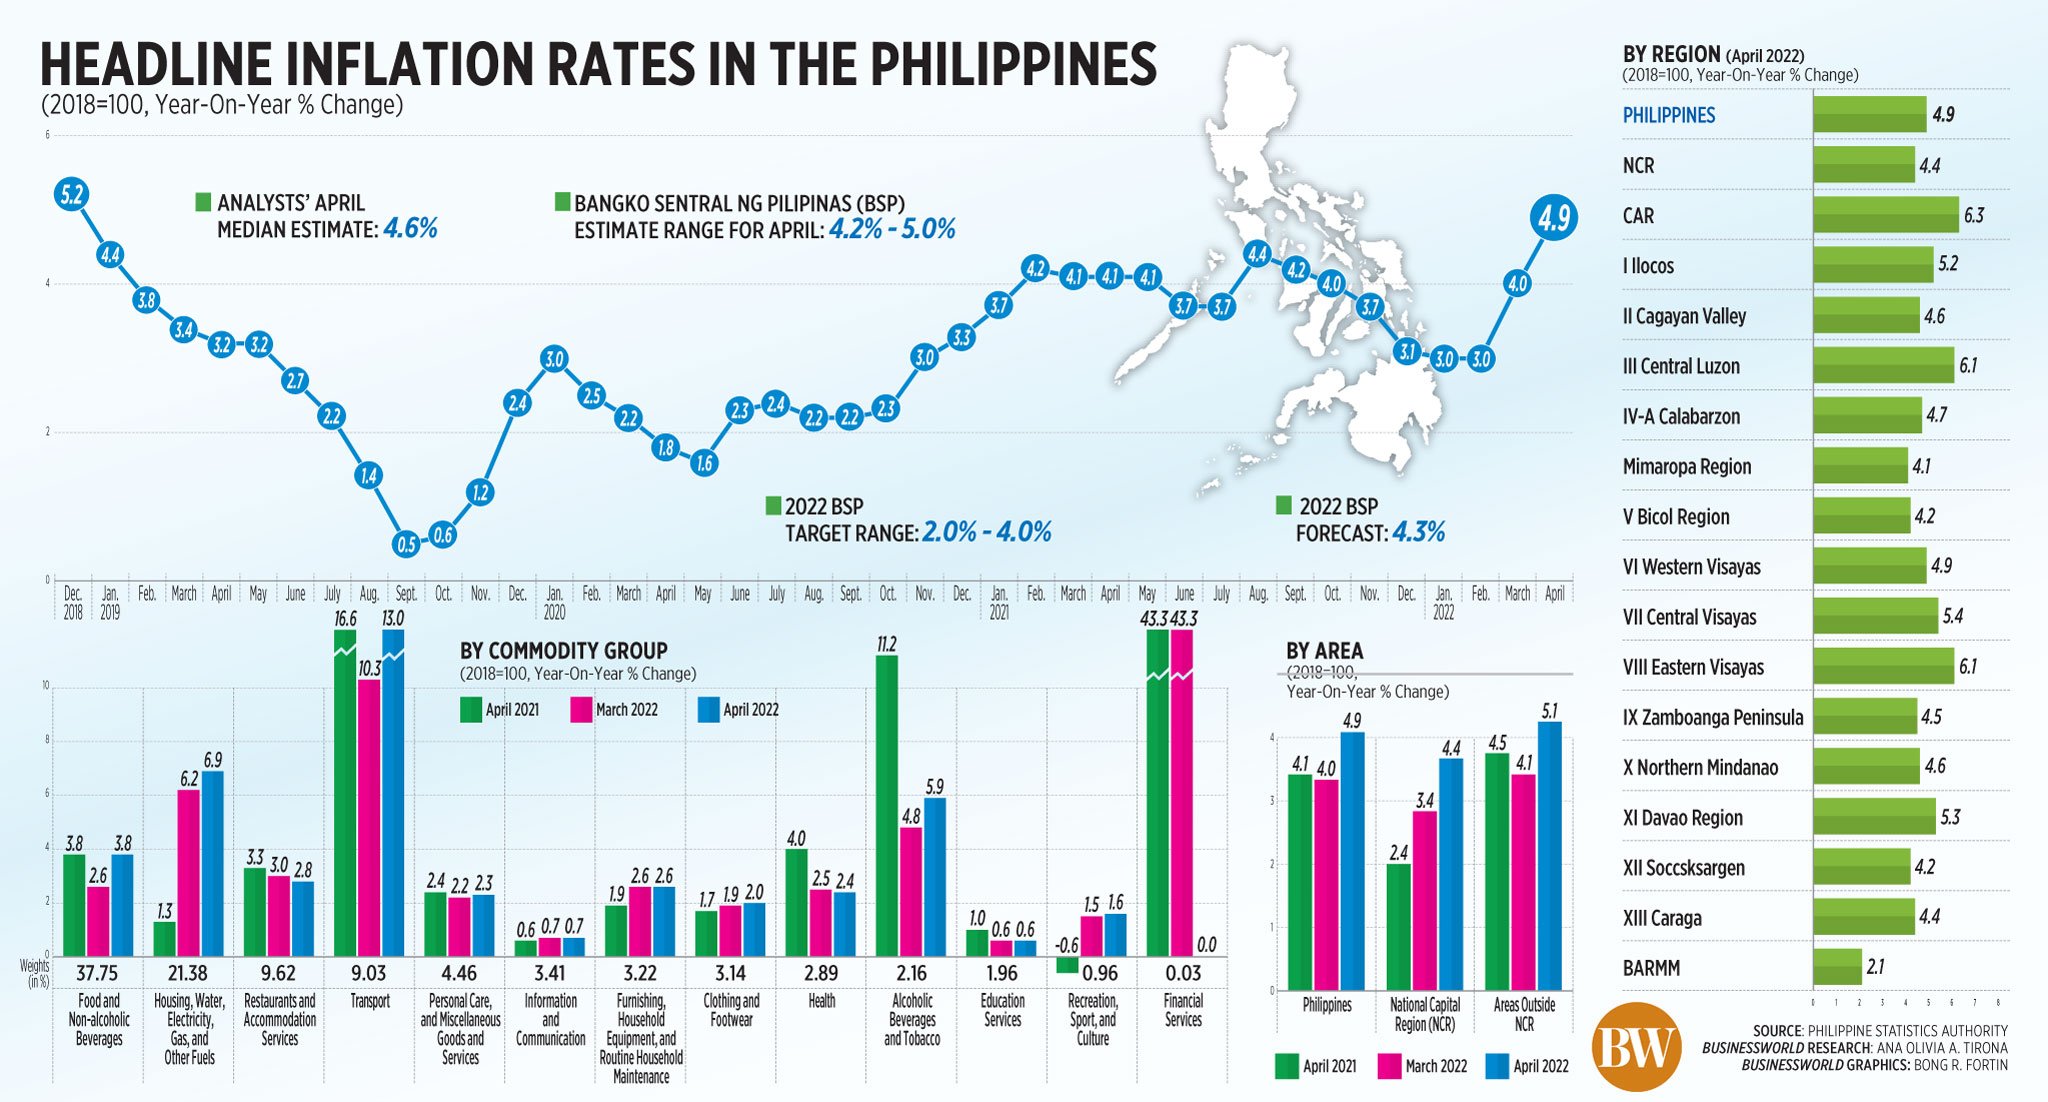 Headline inflation rates in the Philippines